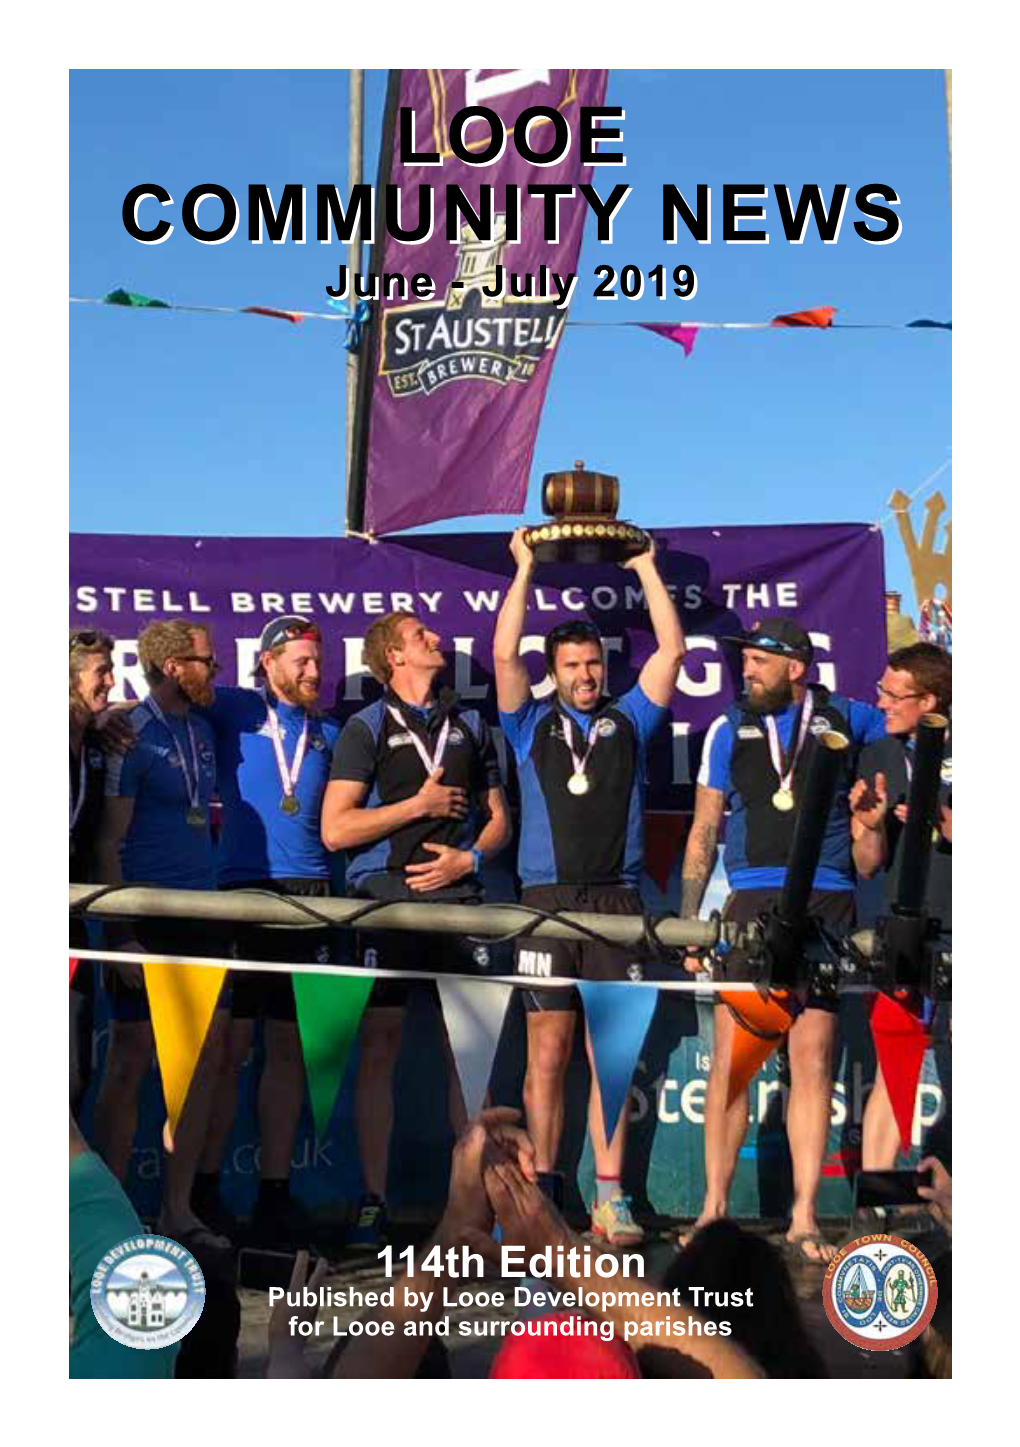 July 19 Issue of Looe Community News